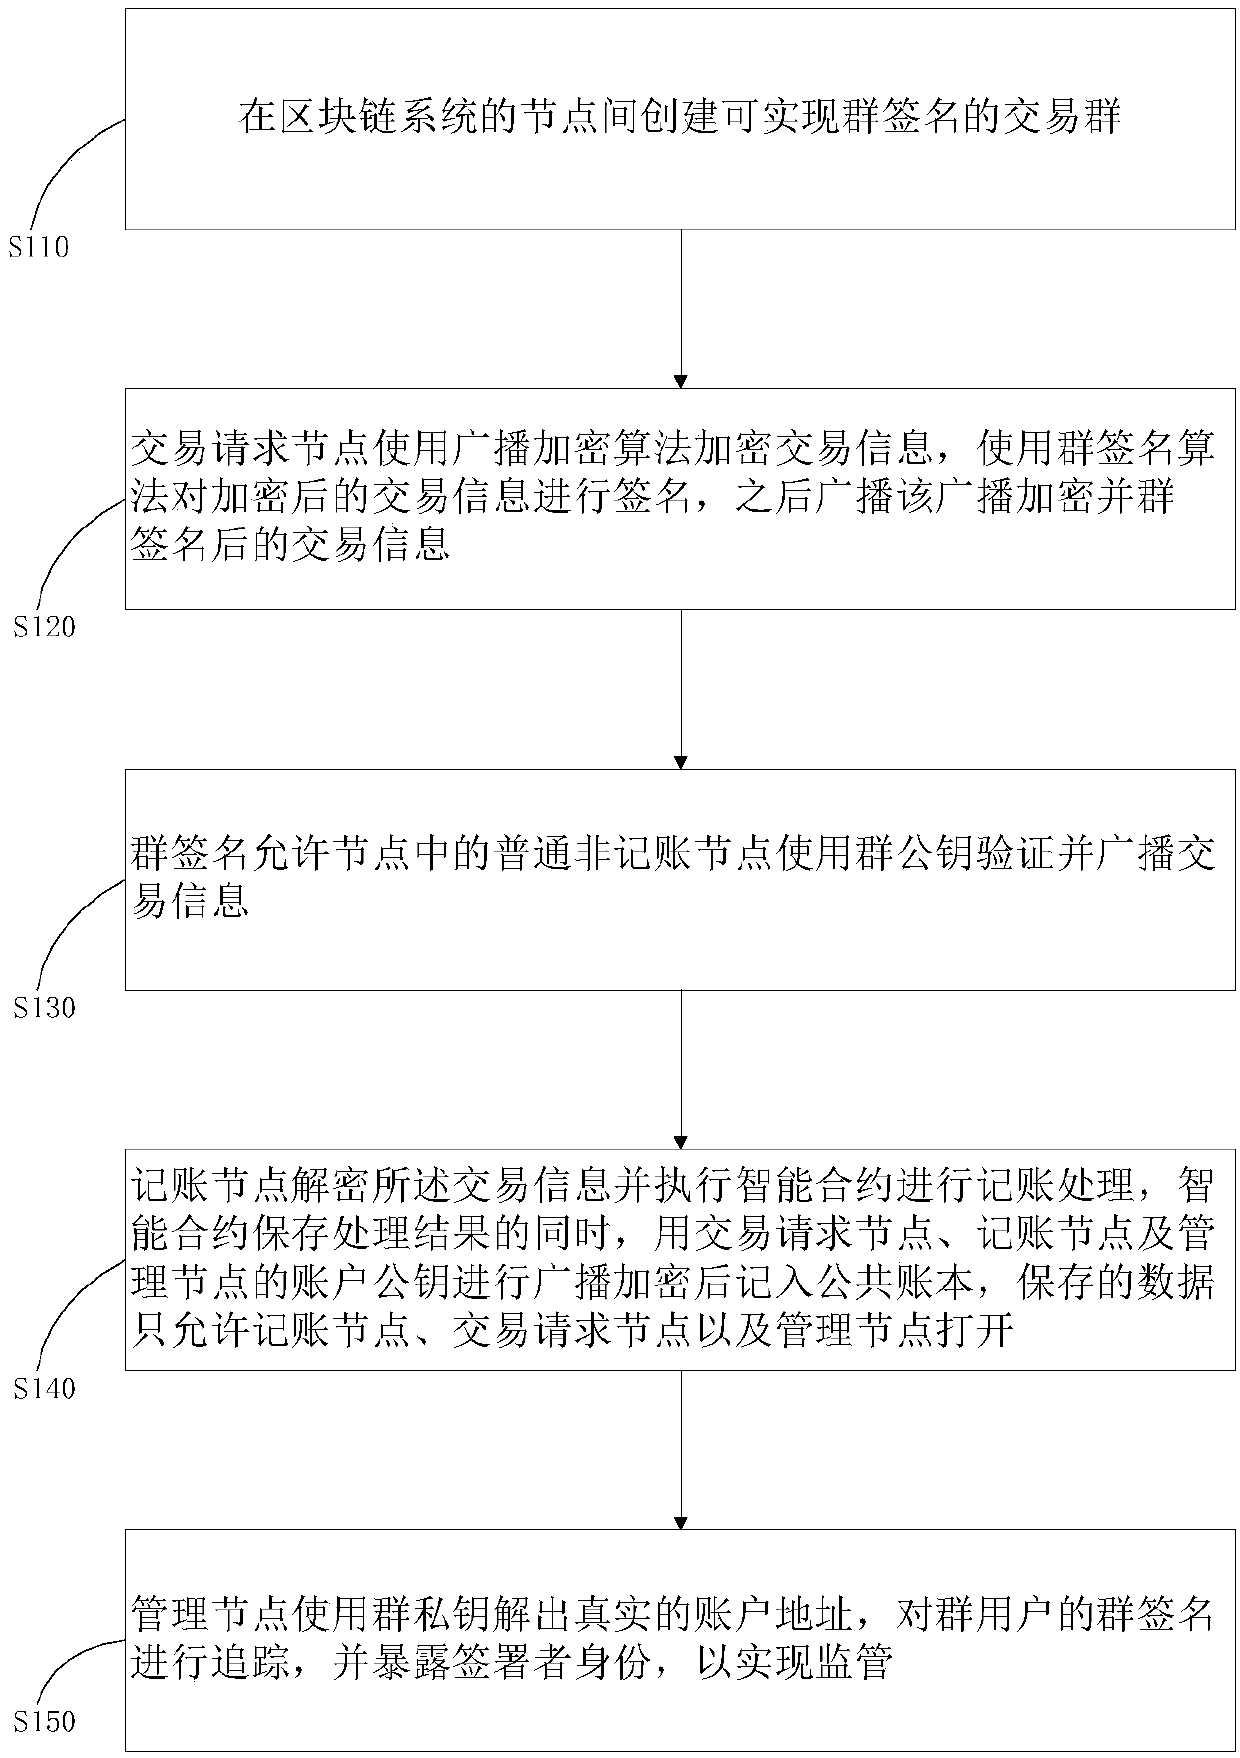 Method and system for privacy protection of block chain transaction